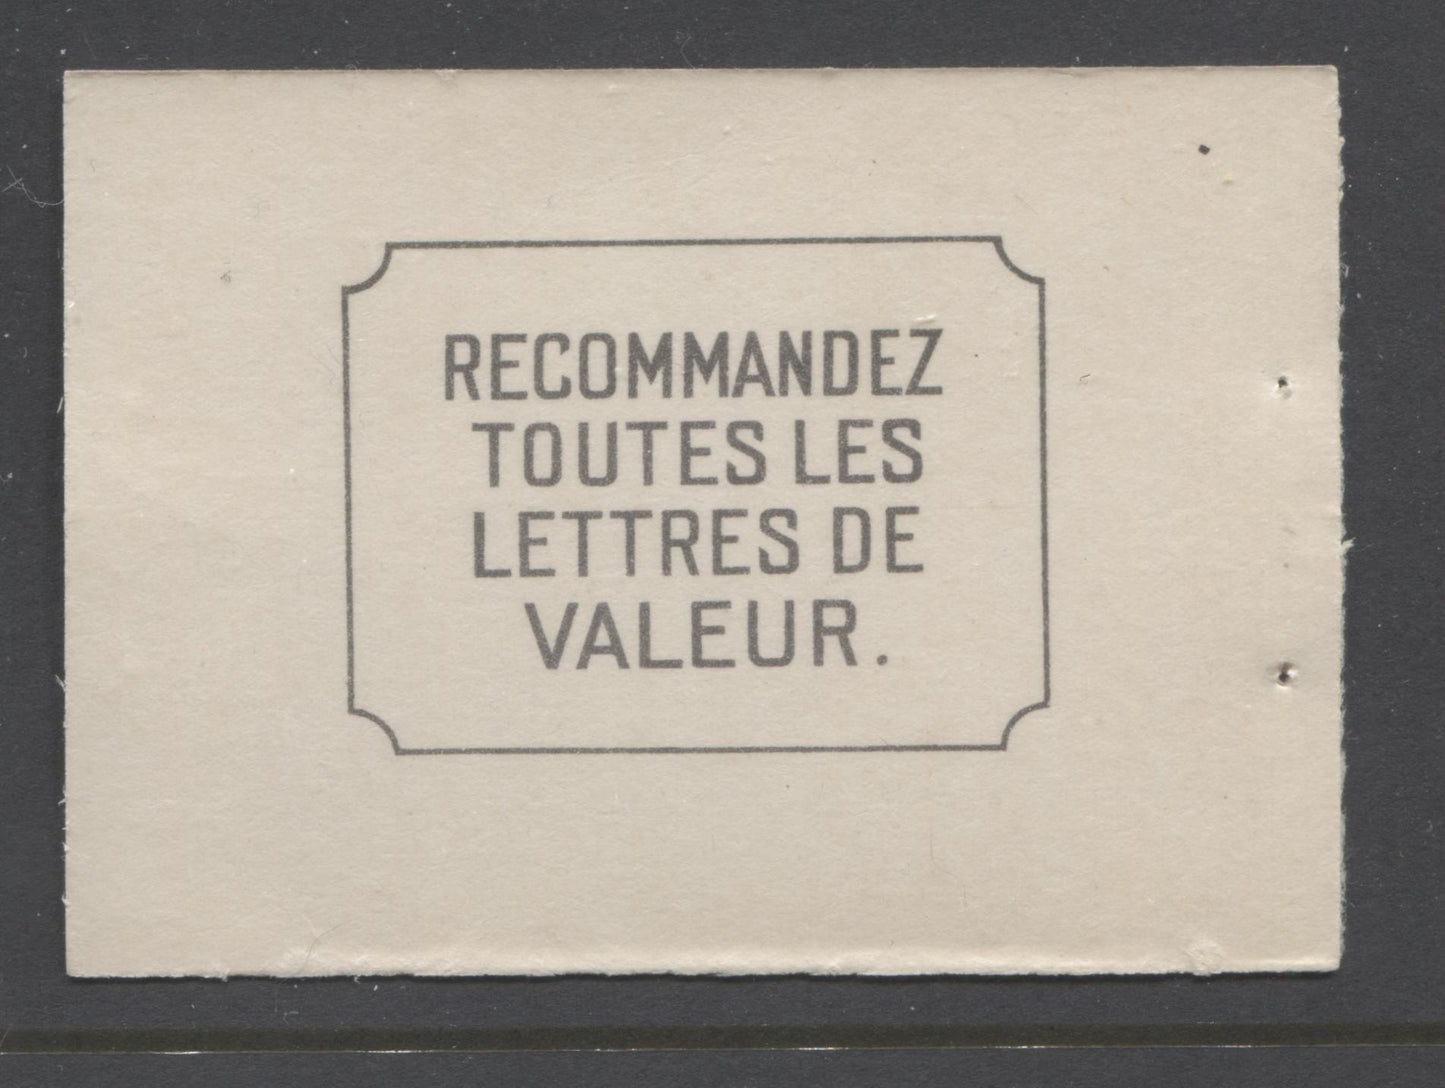 Canada #BK28b 1937-1942 Mufti Issue, Complete 25¢ French Booklet, Smooth Vertical Wove Paper, Type II Covers, Harris Front Cover Type IIj Brixton Chrome 